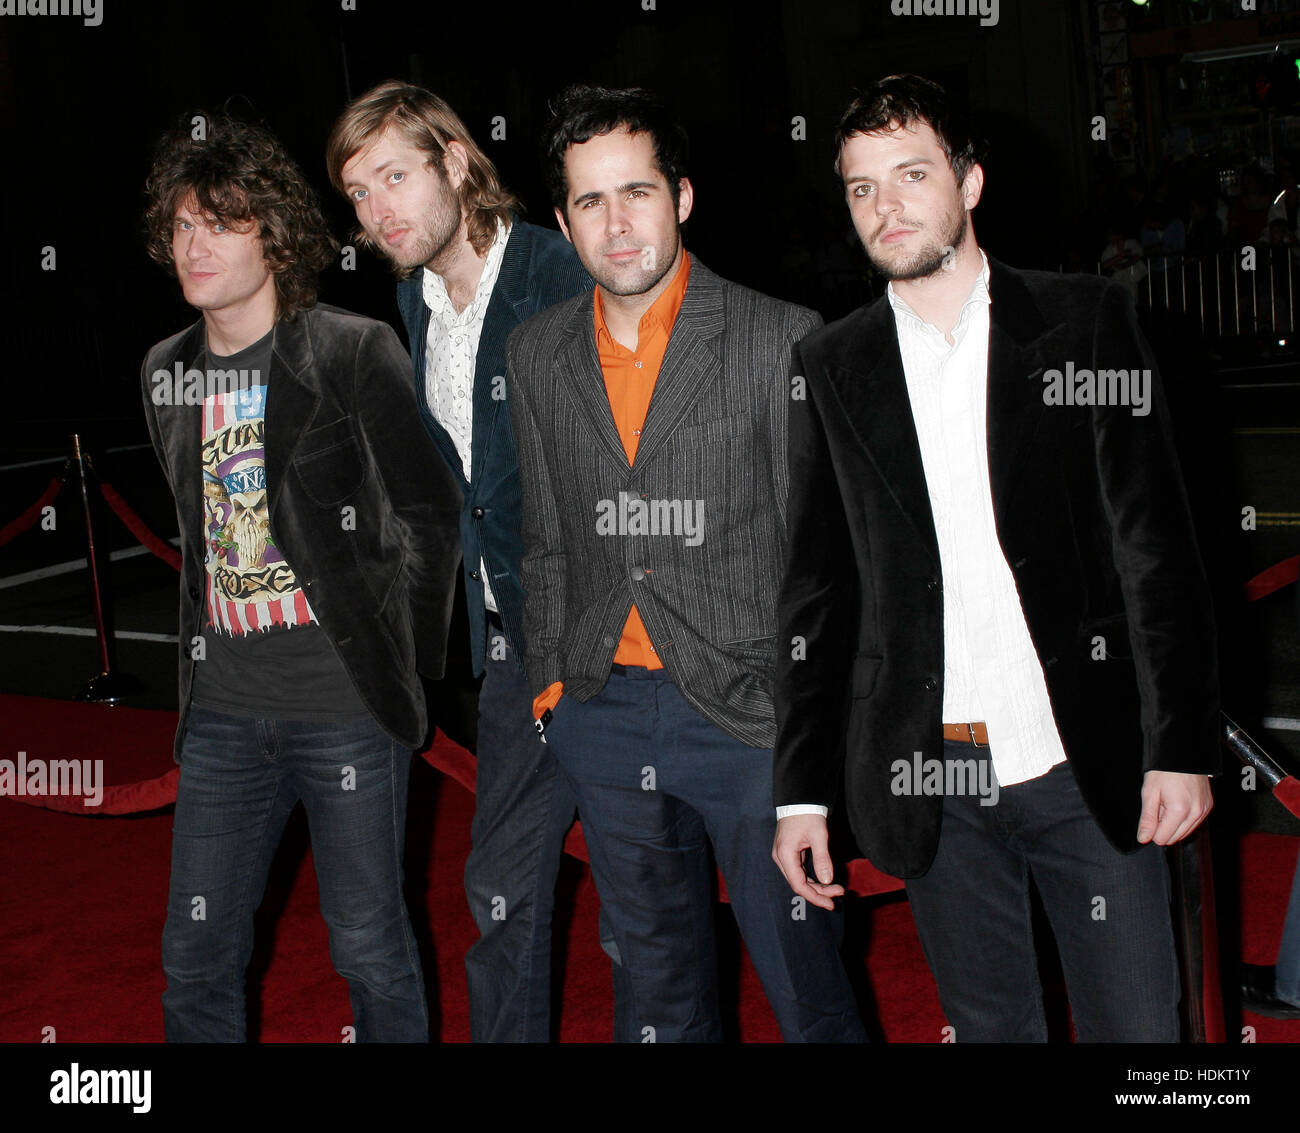 Ronnie Vannucci, David Keuning, Brandon Flowers and Mark Stoermer of the band The Killers  at the premiere of the film, 'Alexander'' at Grauman's Chinese Theatre on November 16, 2004 in Los Angeles. Photo credit: Francis Specker Stock Photo